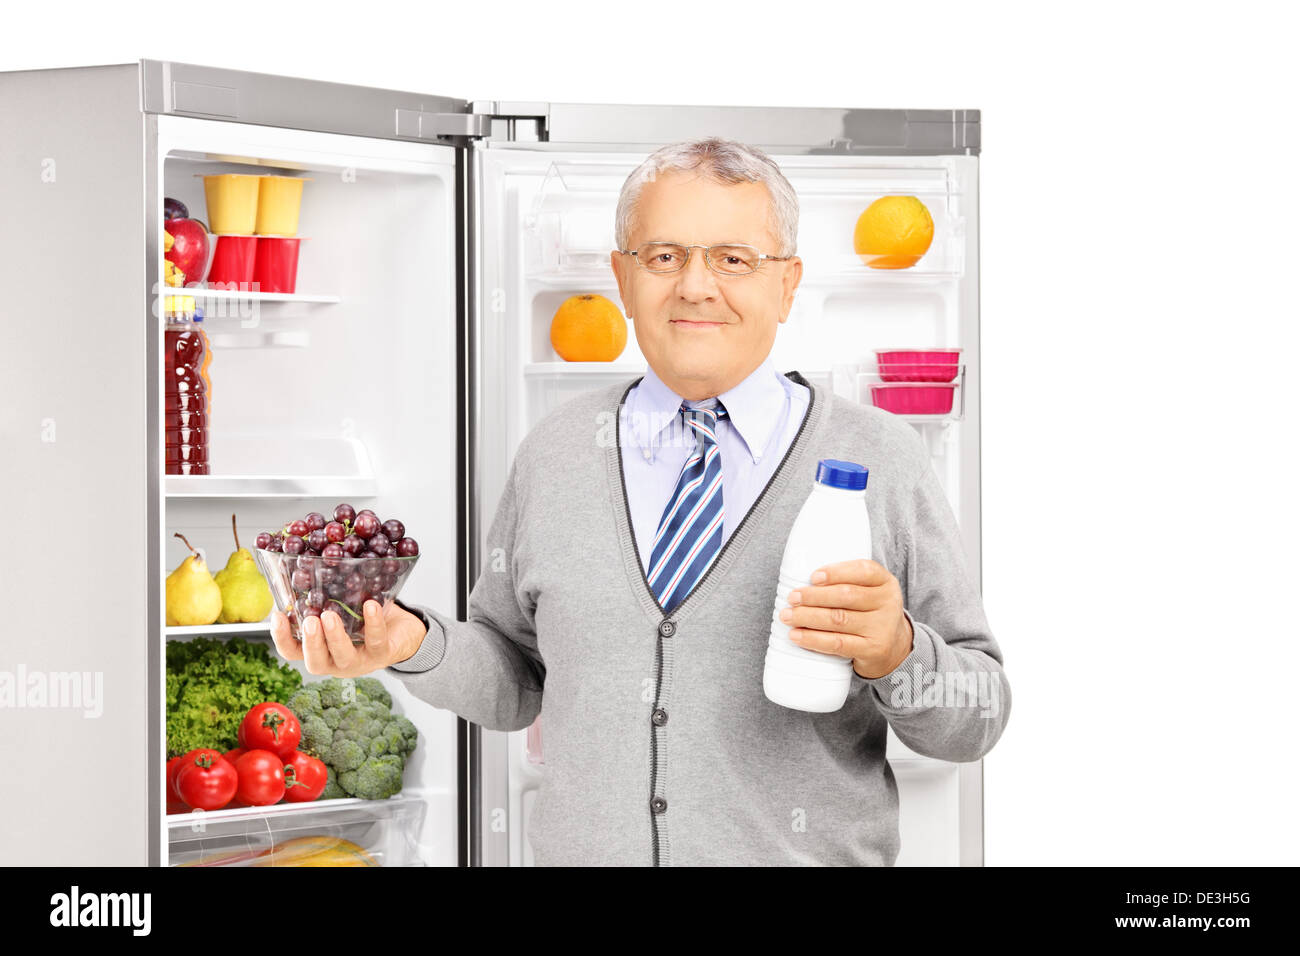 Smiling mature man holding a milk bottle and bowl of grapes next to a refrigerator Stock Photo